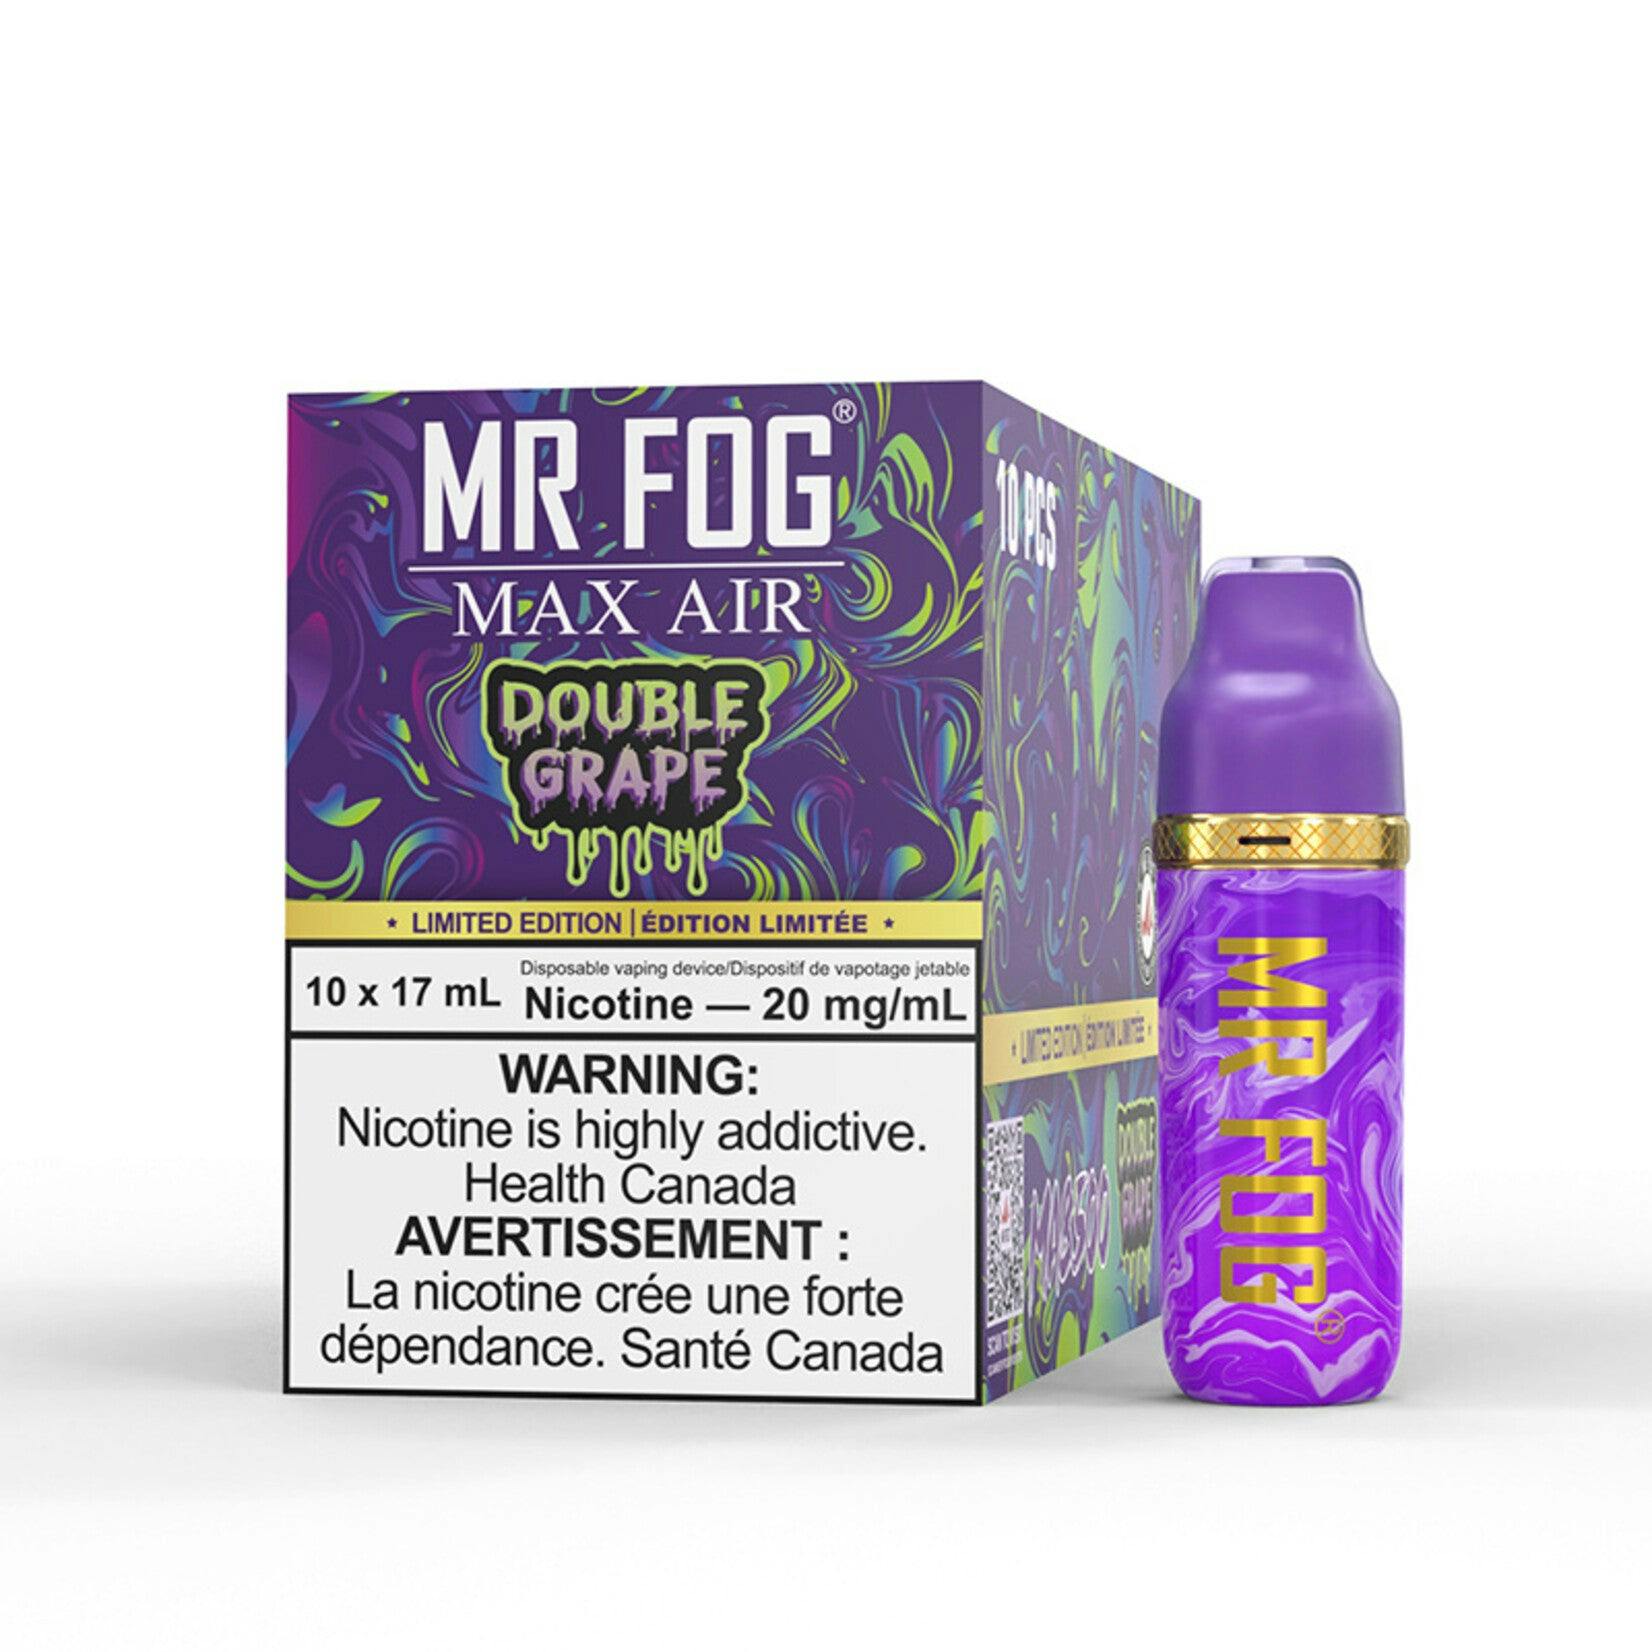 MR FOG MAX AIR MA8500 Disposable Vape - 10CT - Excise Version-undefined | For sale Jubilee Distributors